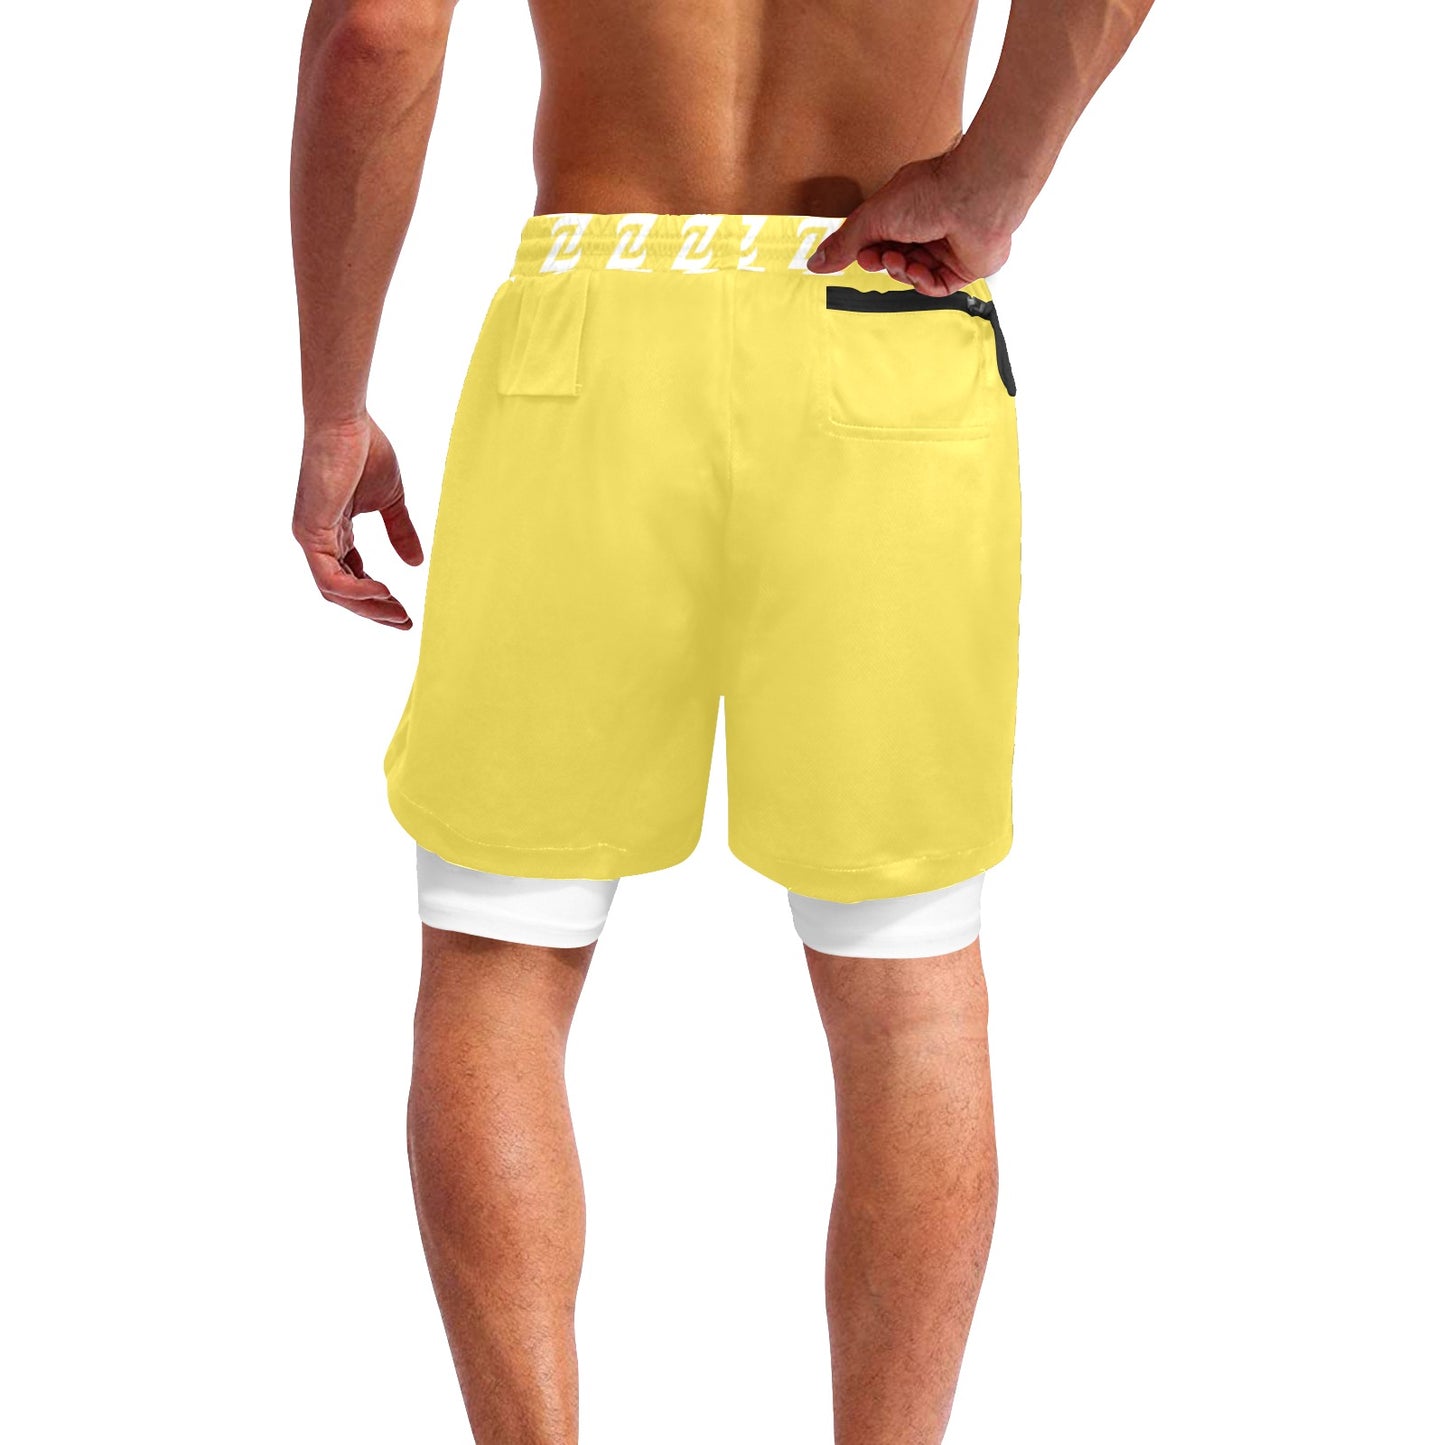 Zen Shorts with Liner - Yellow